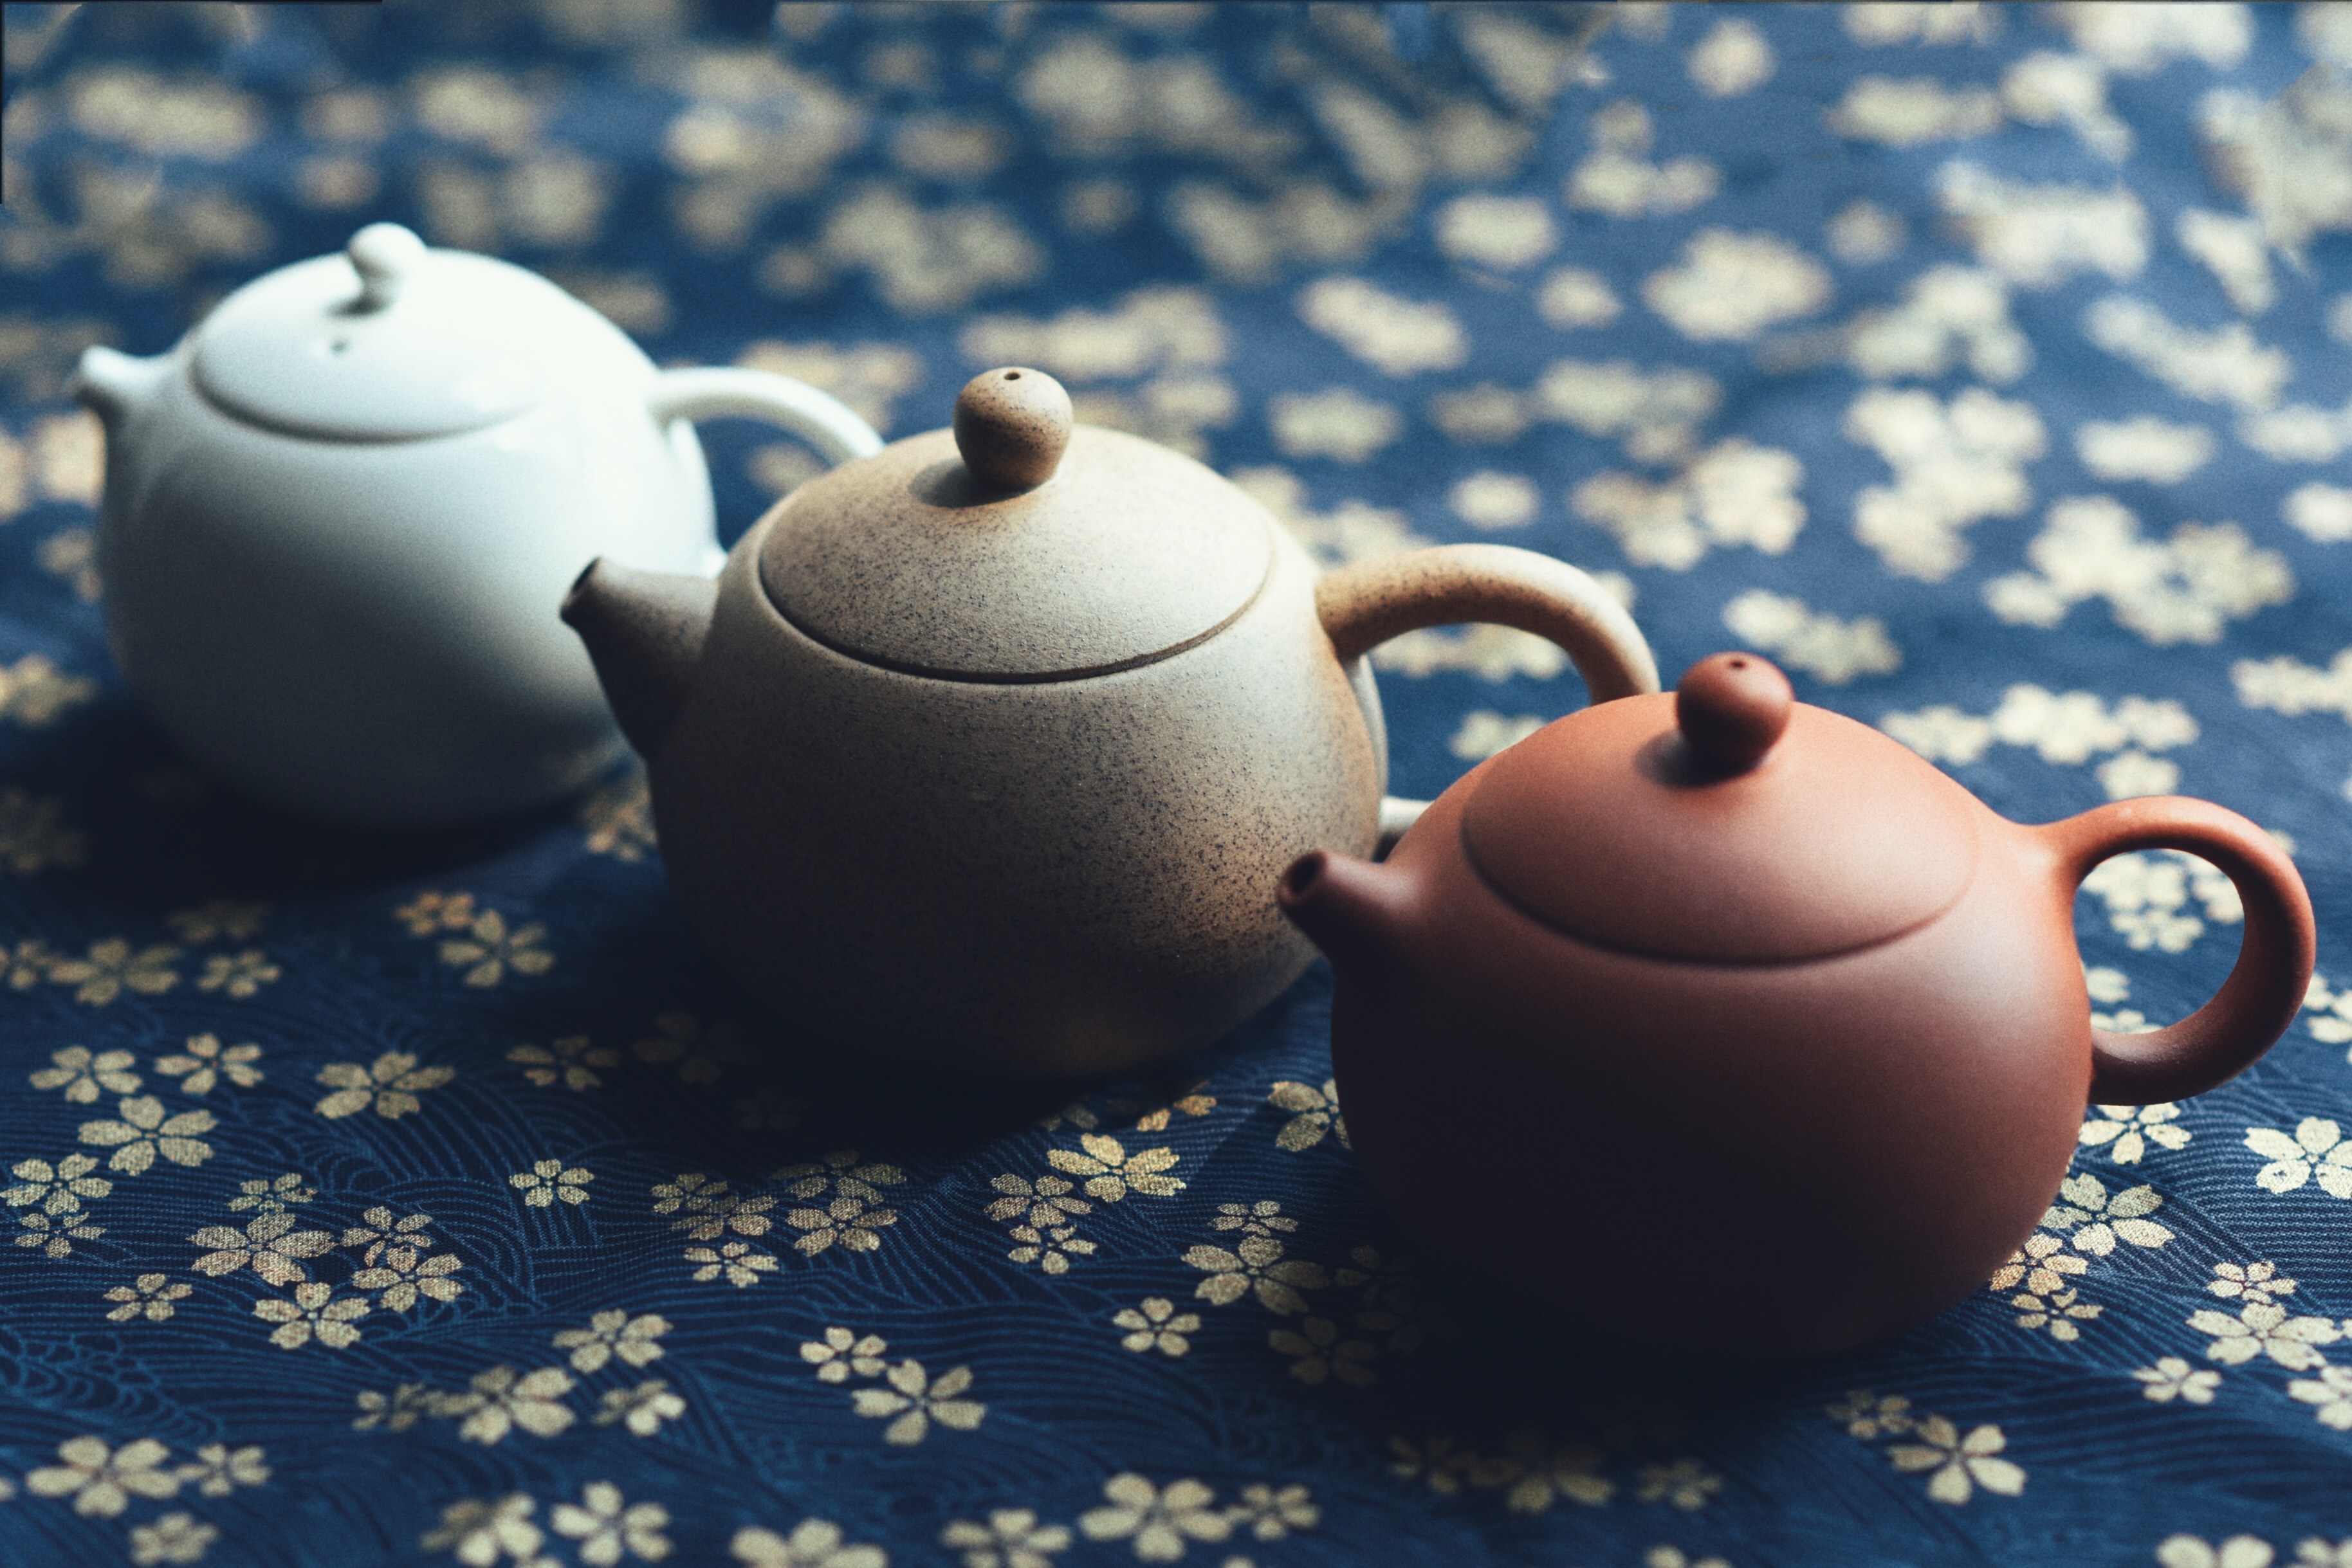 Three ceramic teapots stand on a blue fabric with florals